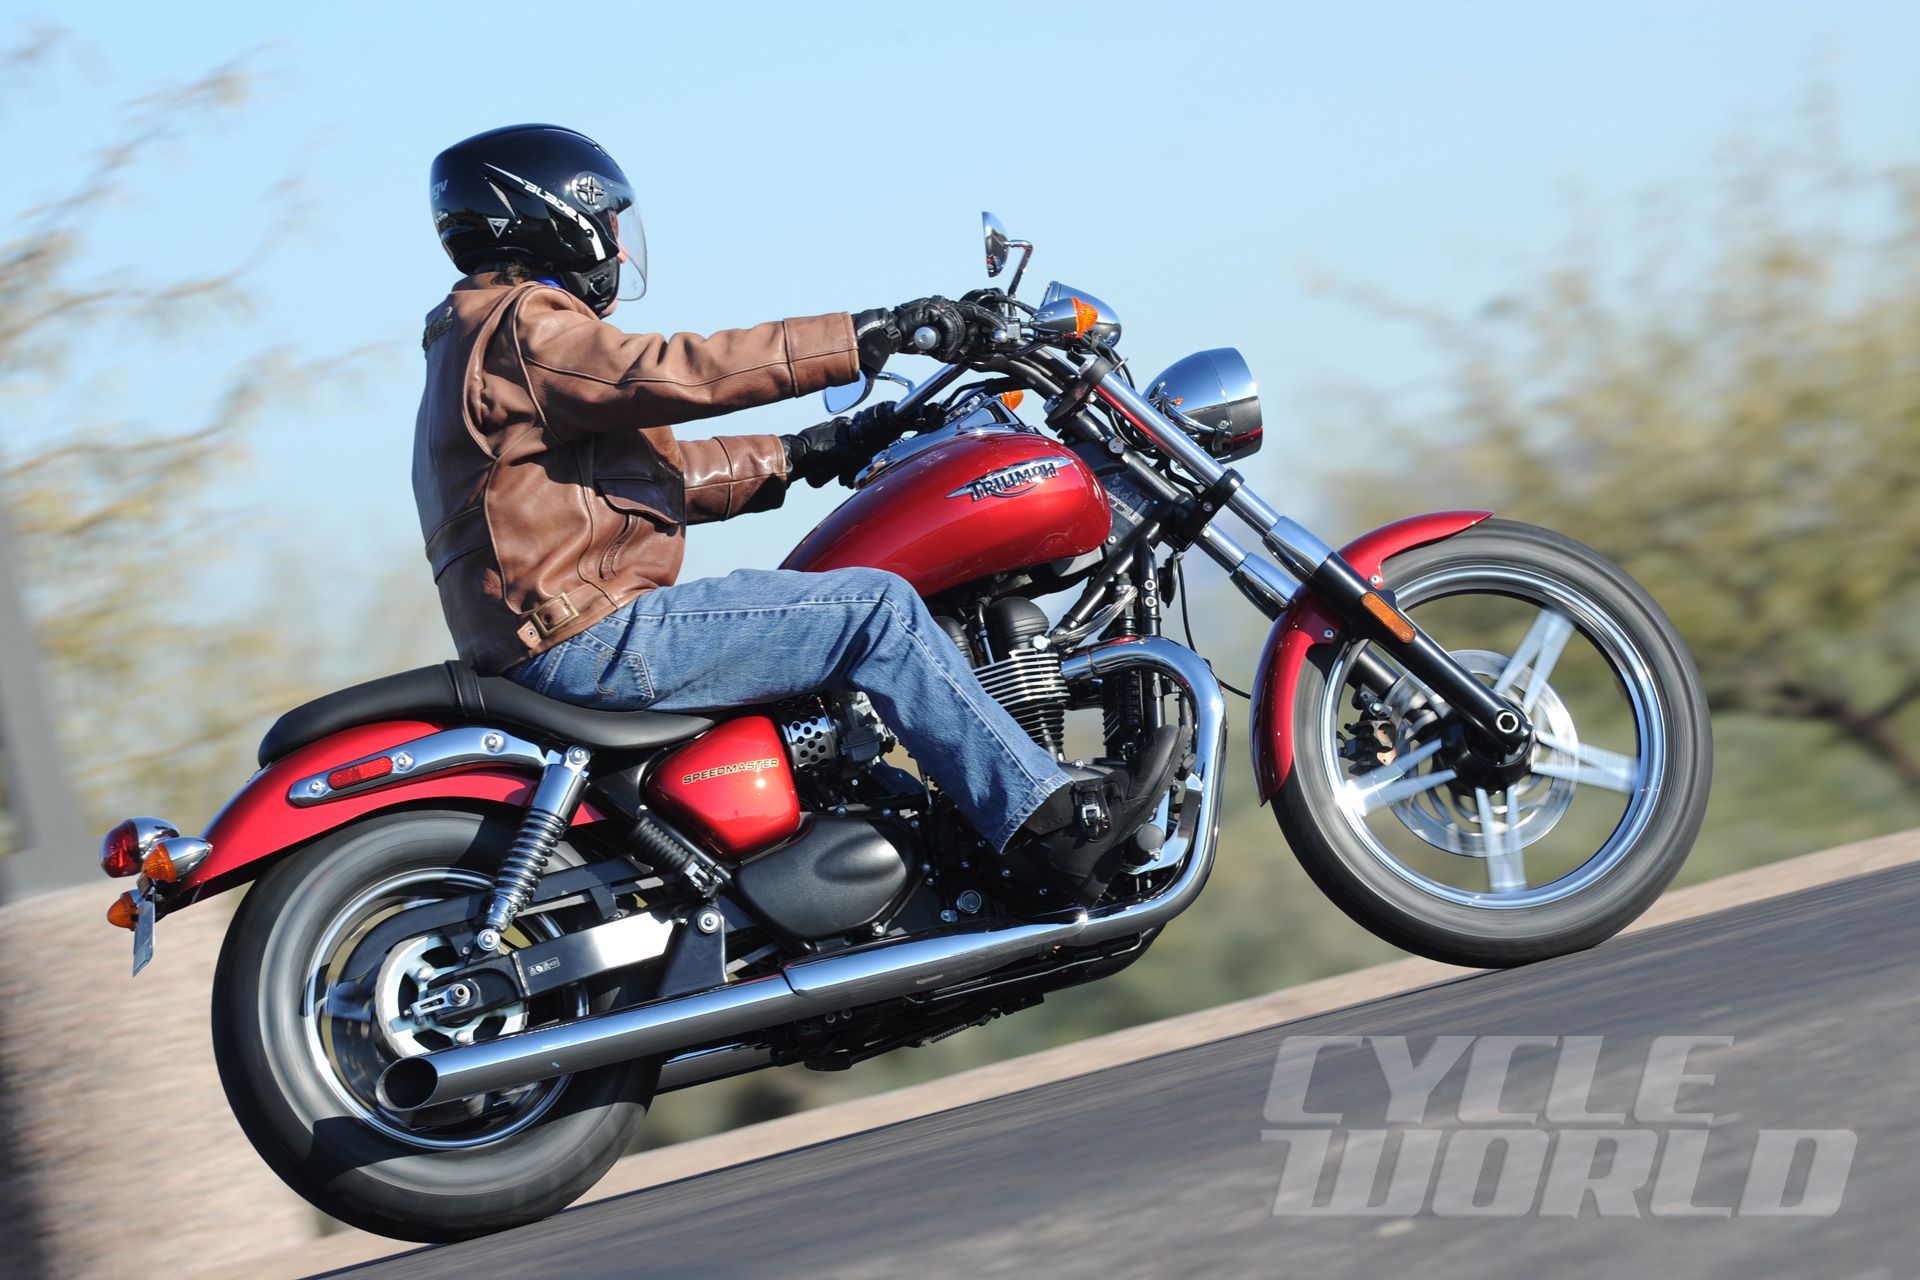 Triumph Speedmaster Cruiser Motorcycle Review Riding Impression Cycle World